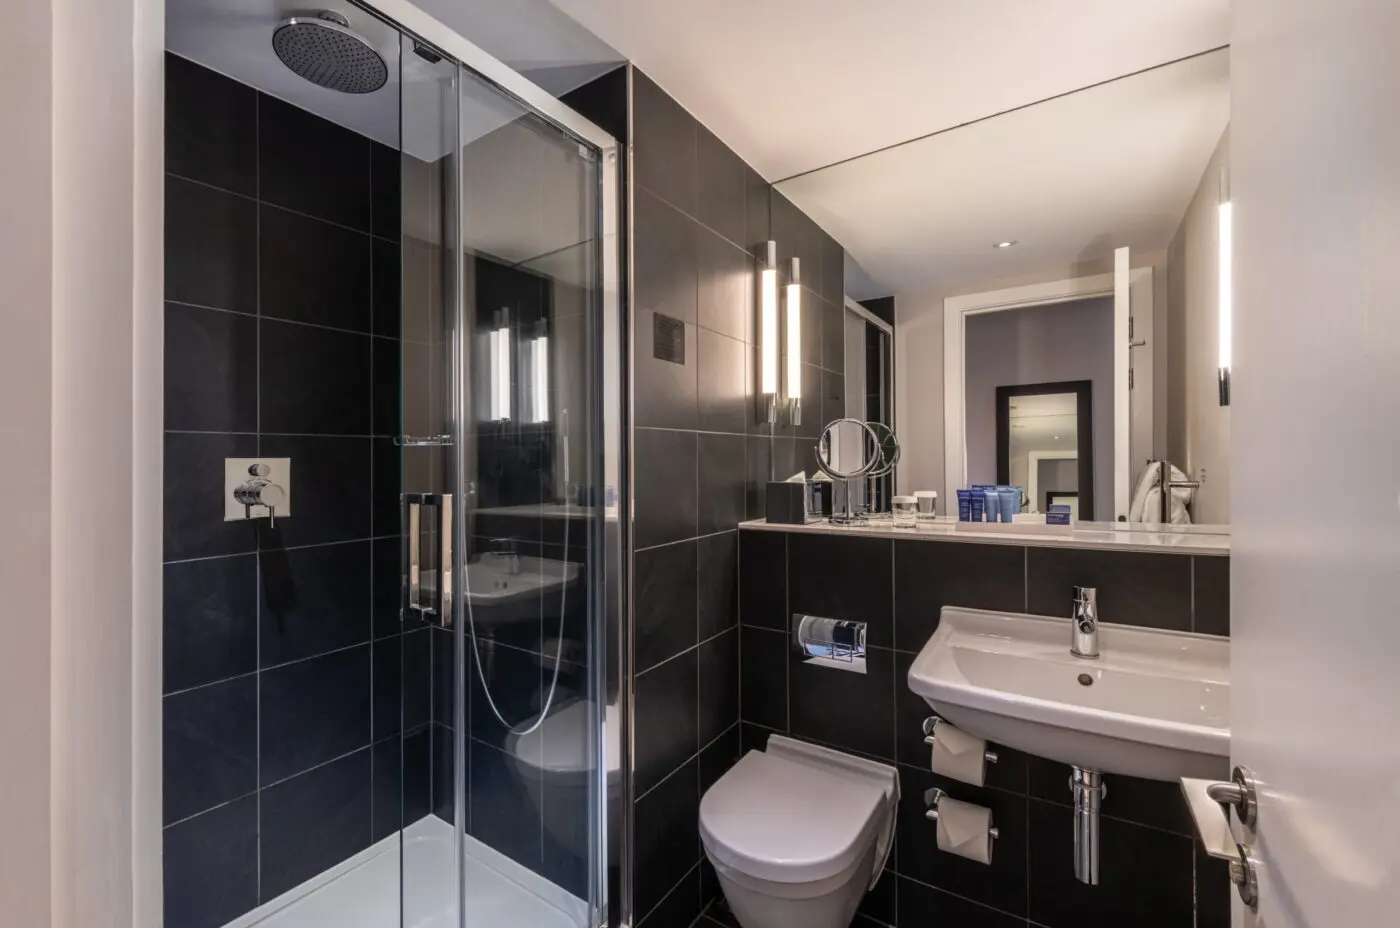 A single room bathroom with a walk-in shower, located in Soho.